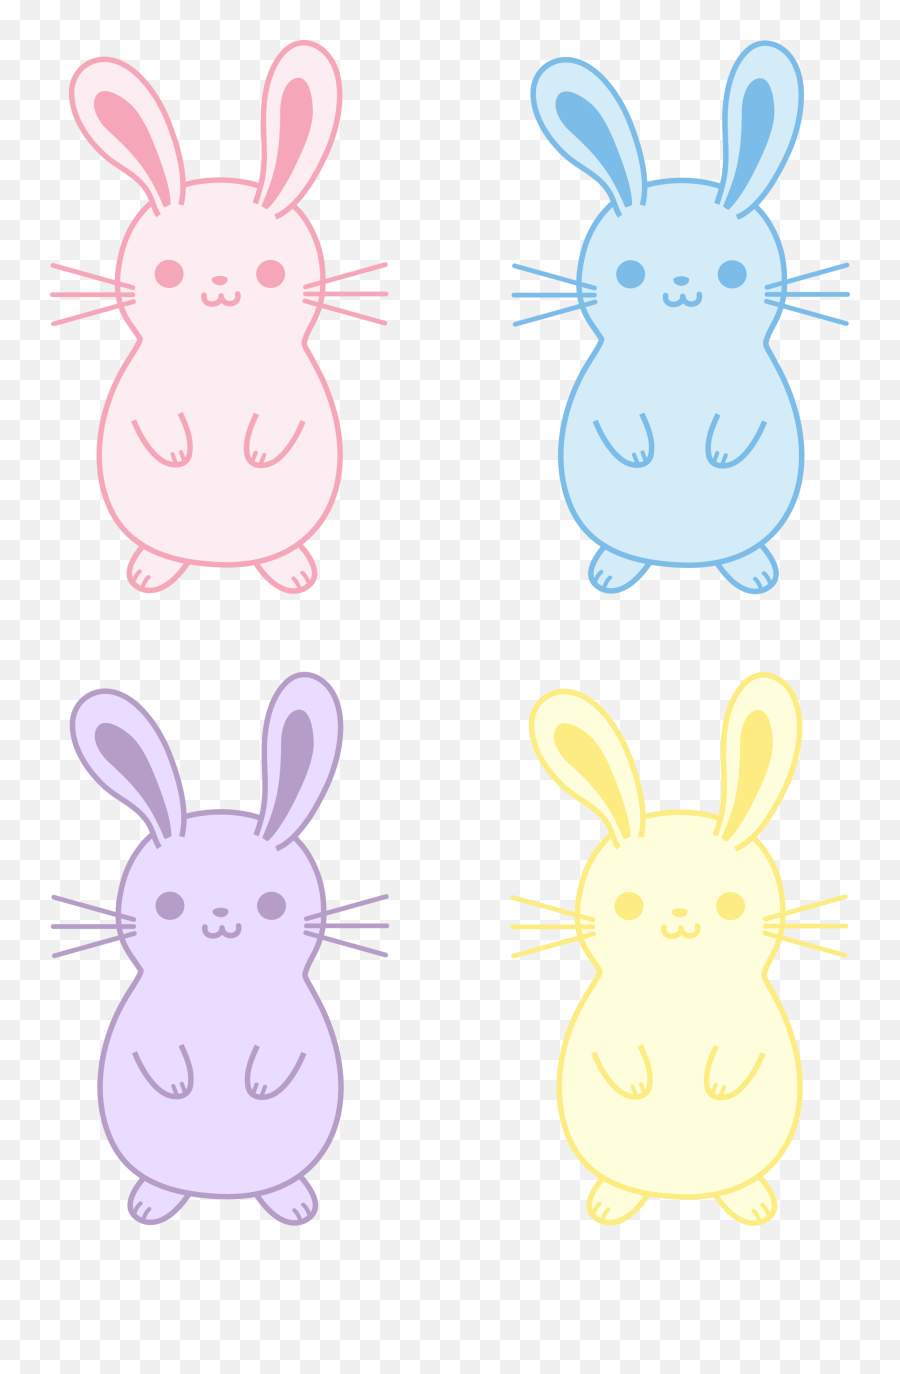 Set Of Four Cute Easter Bunnies - Free Clip Art Easter 4 Cute Bunnies Cartoon Emoji,Easter Bunny Clipart